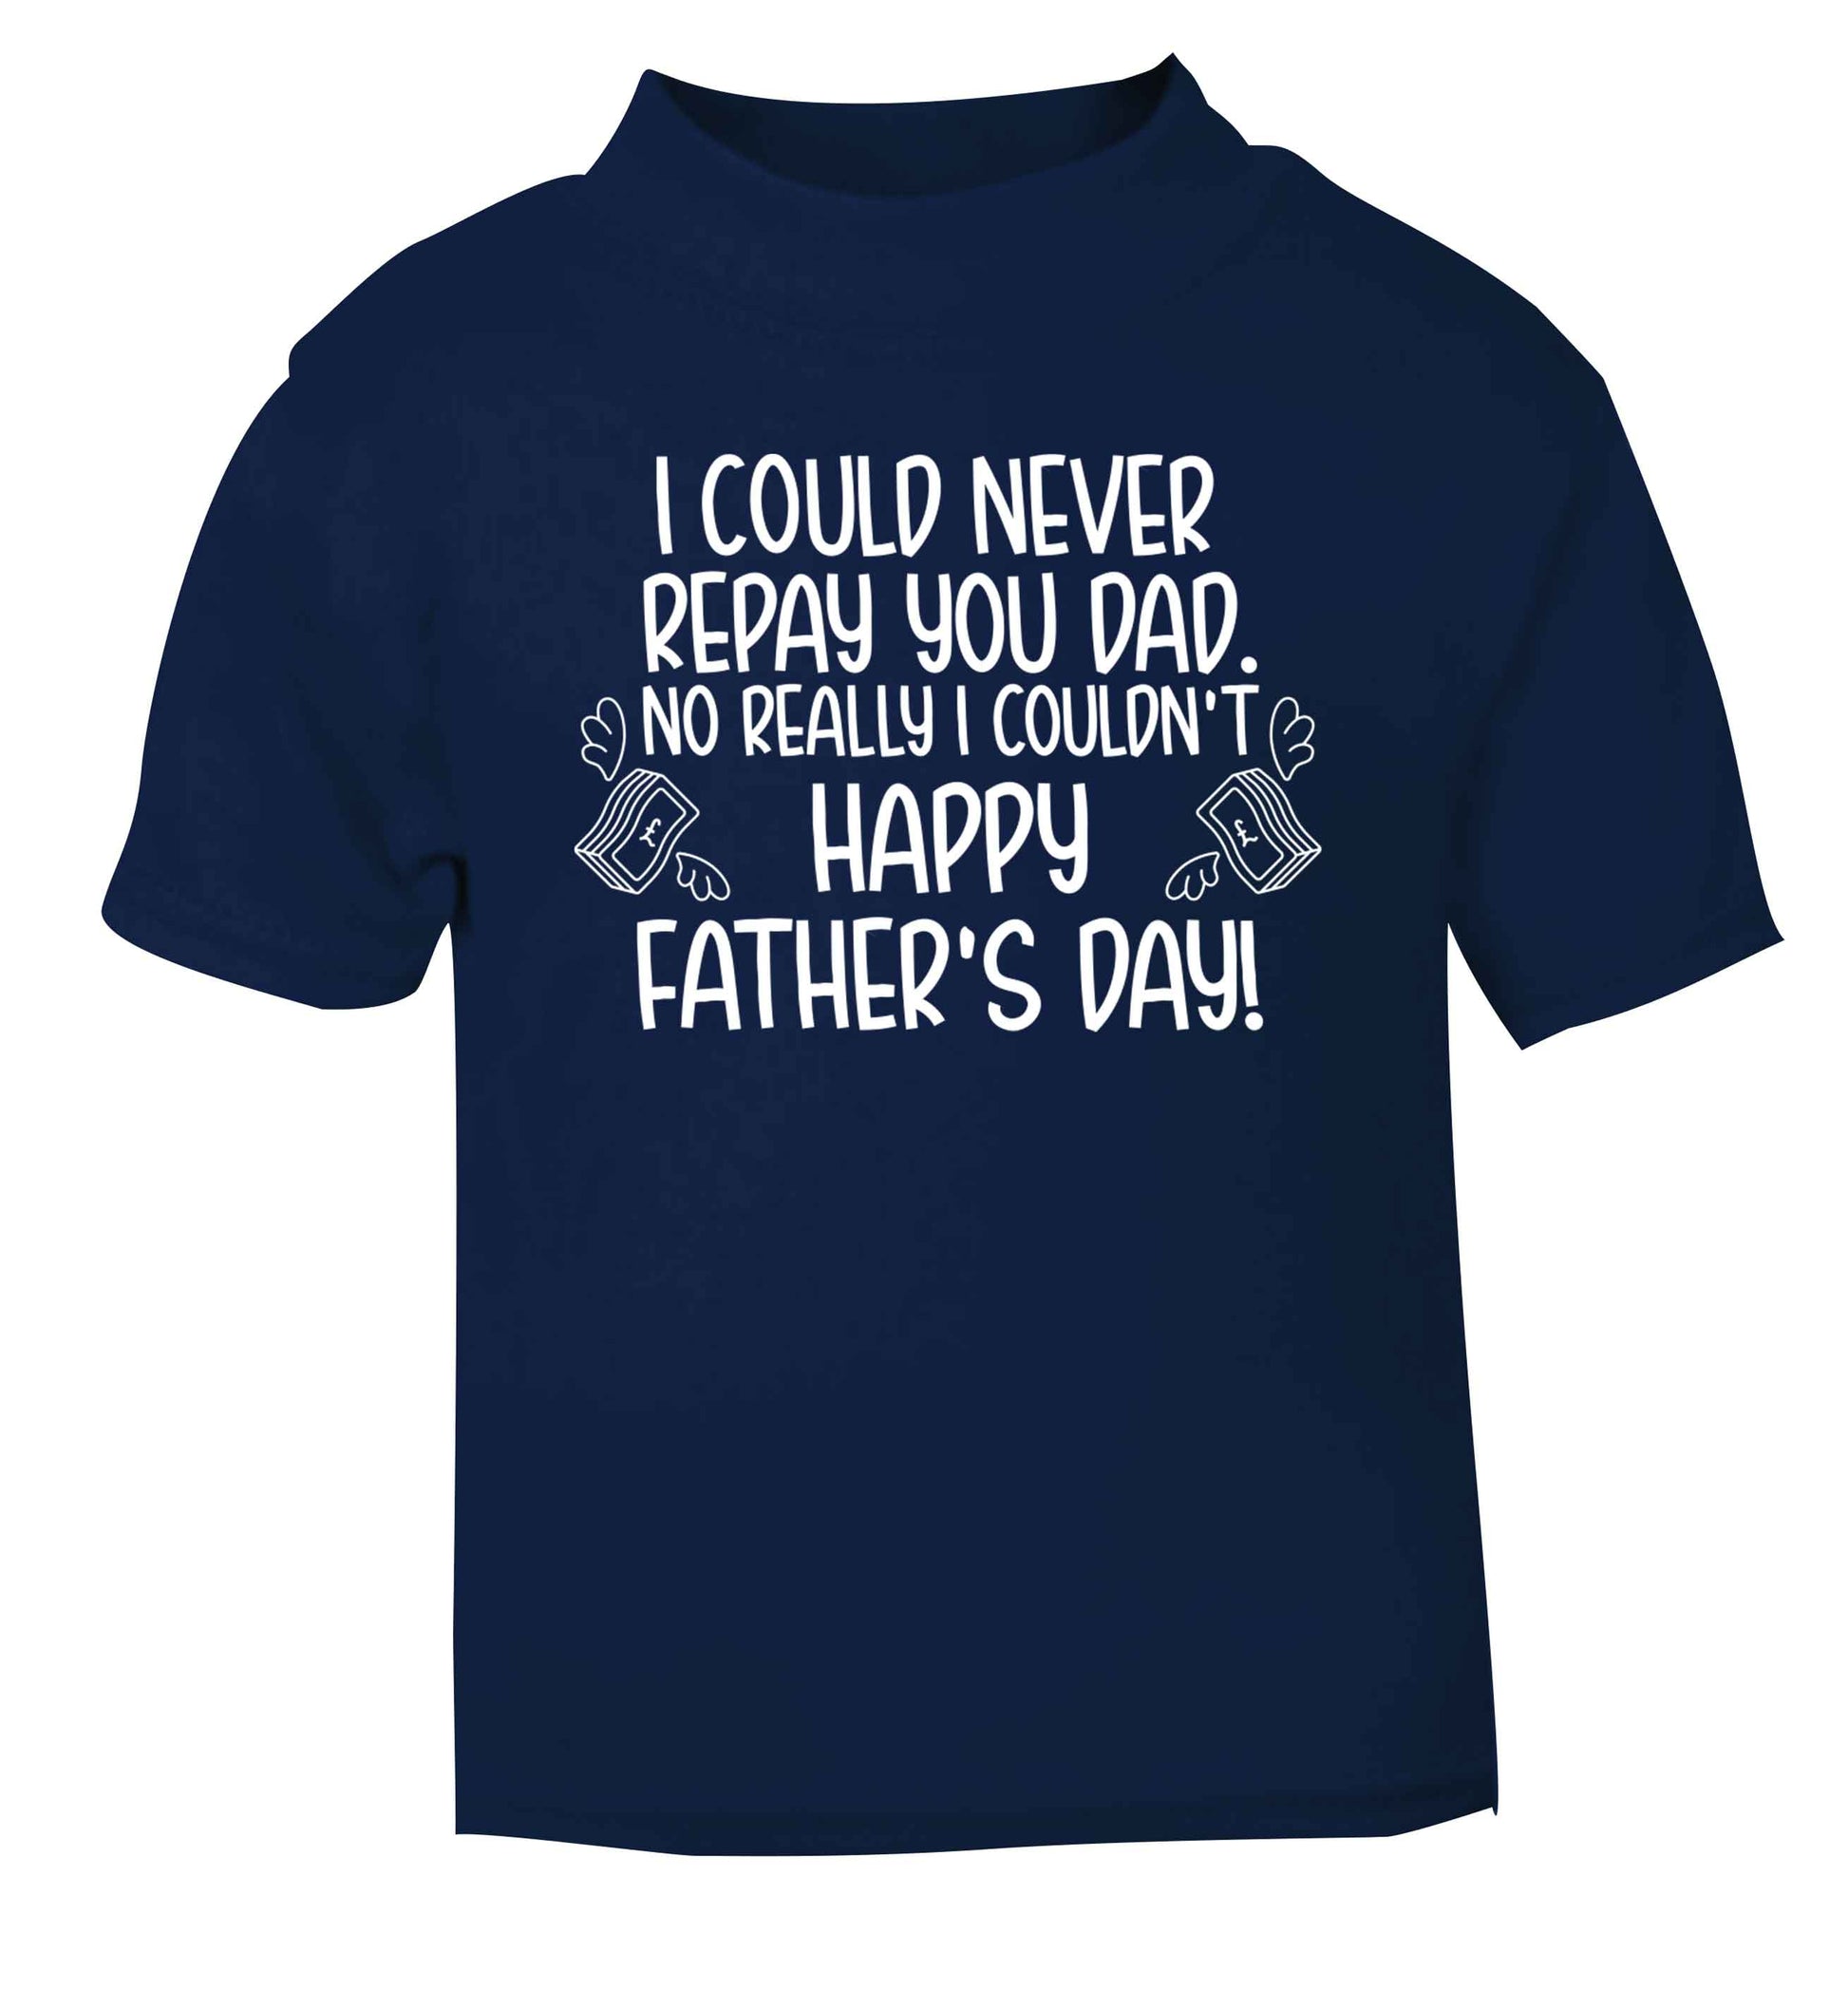 I could never repay you dad. No I really couldn't happy Father's day! navy baby toddler Tshirt 2 Years